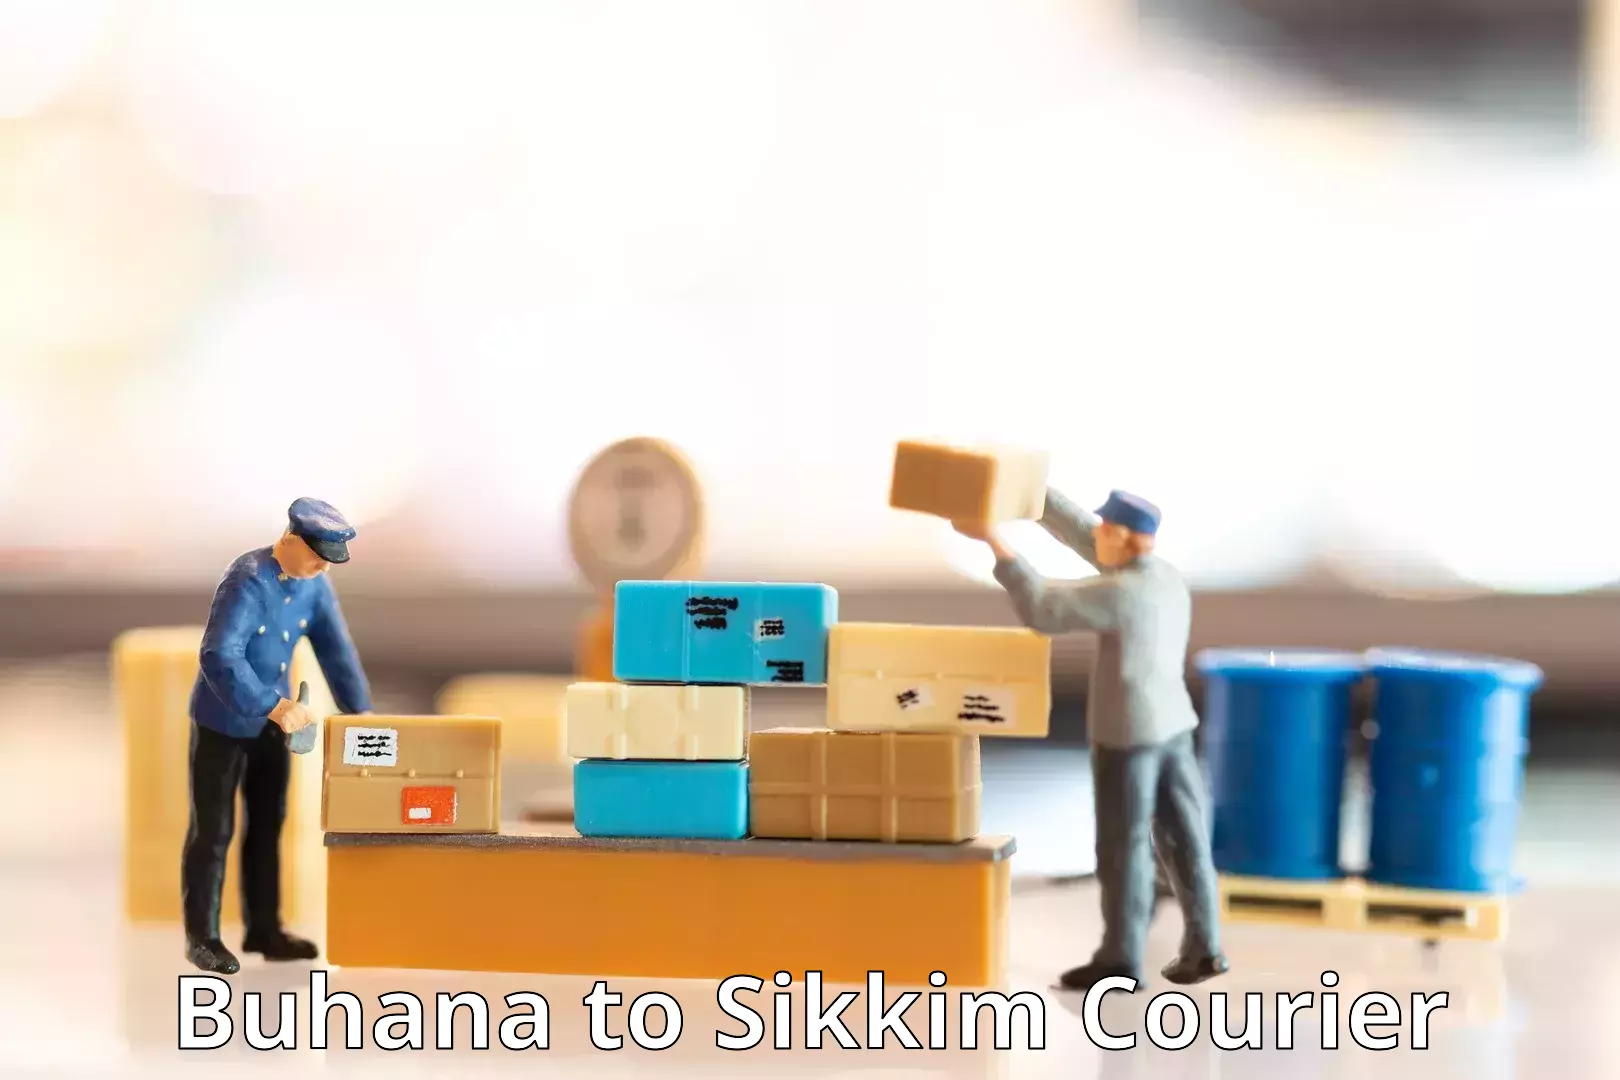 Courier service innovation Buhana to Sikkim